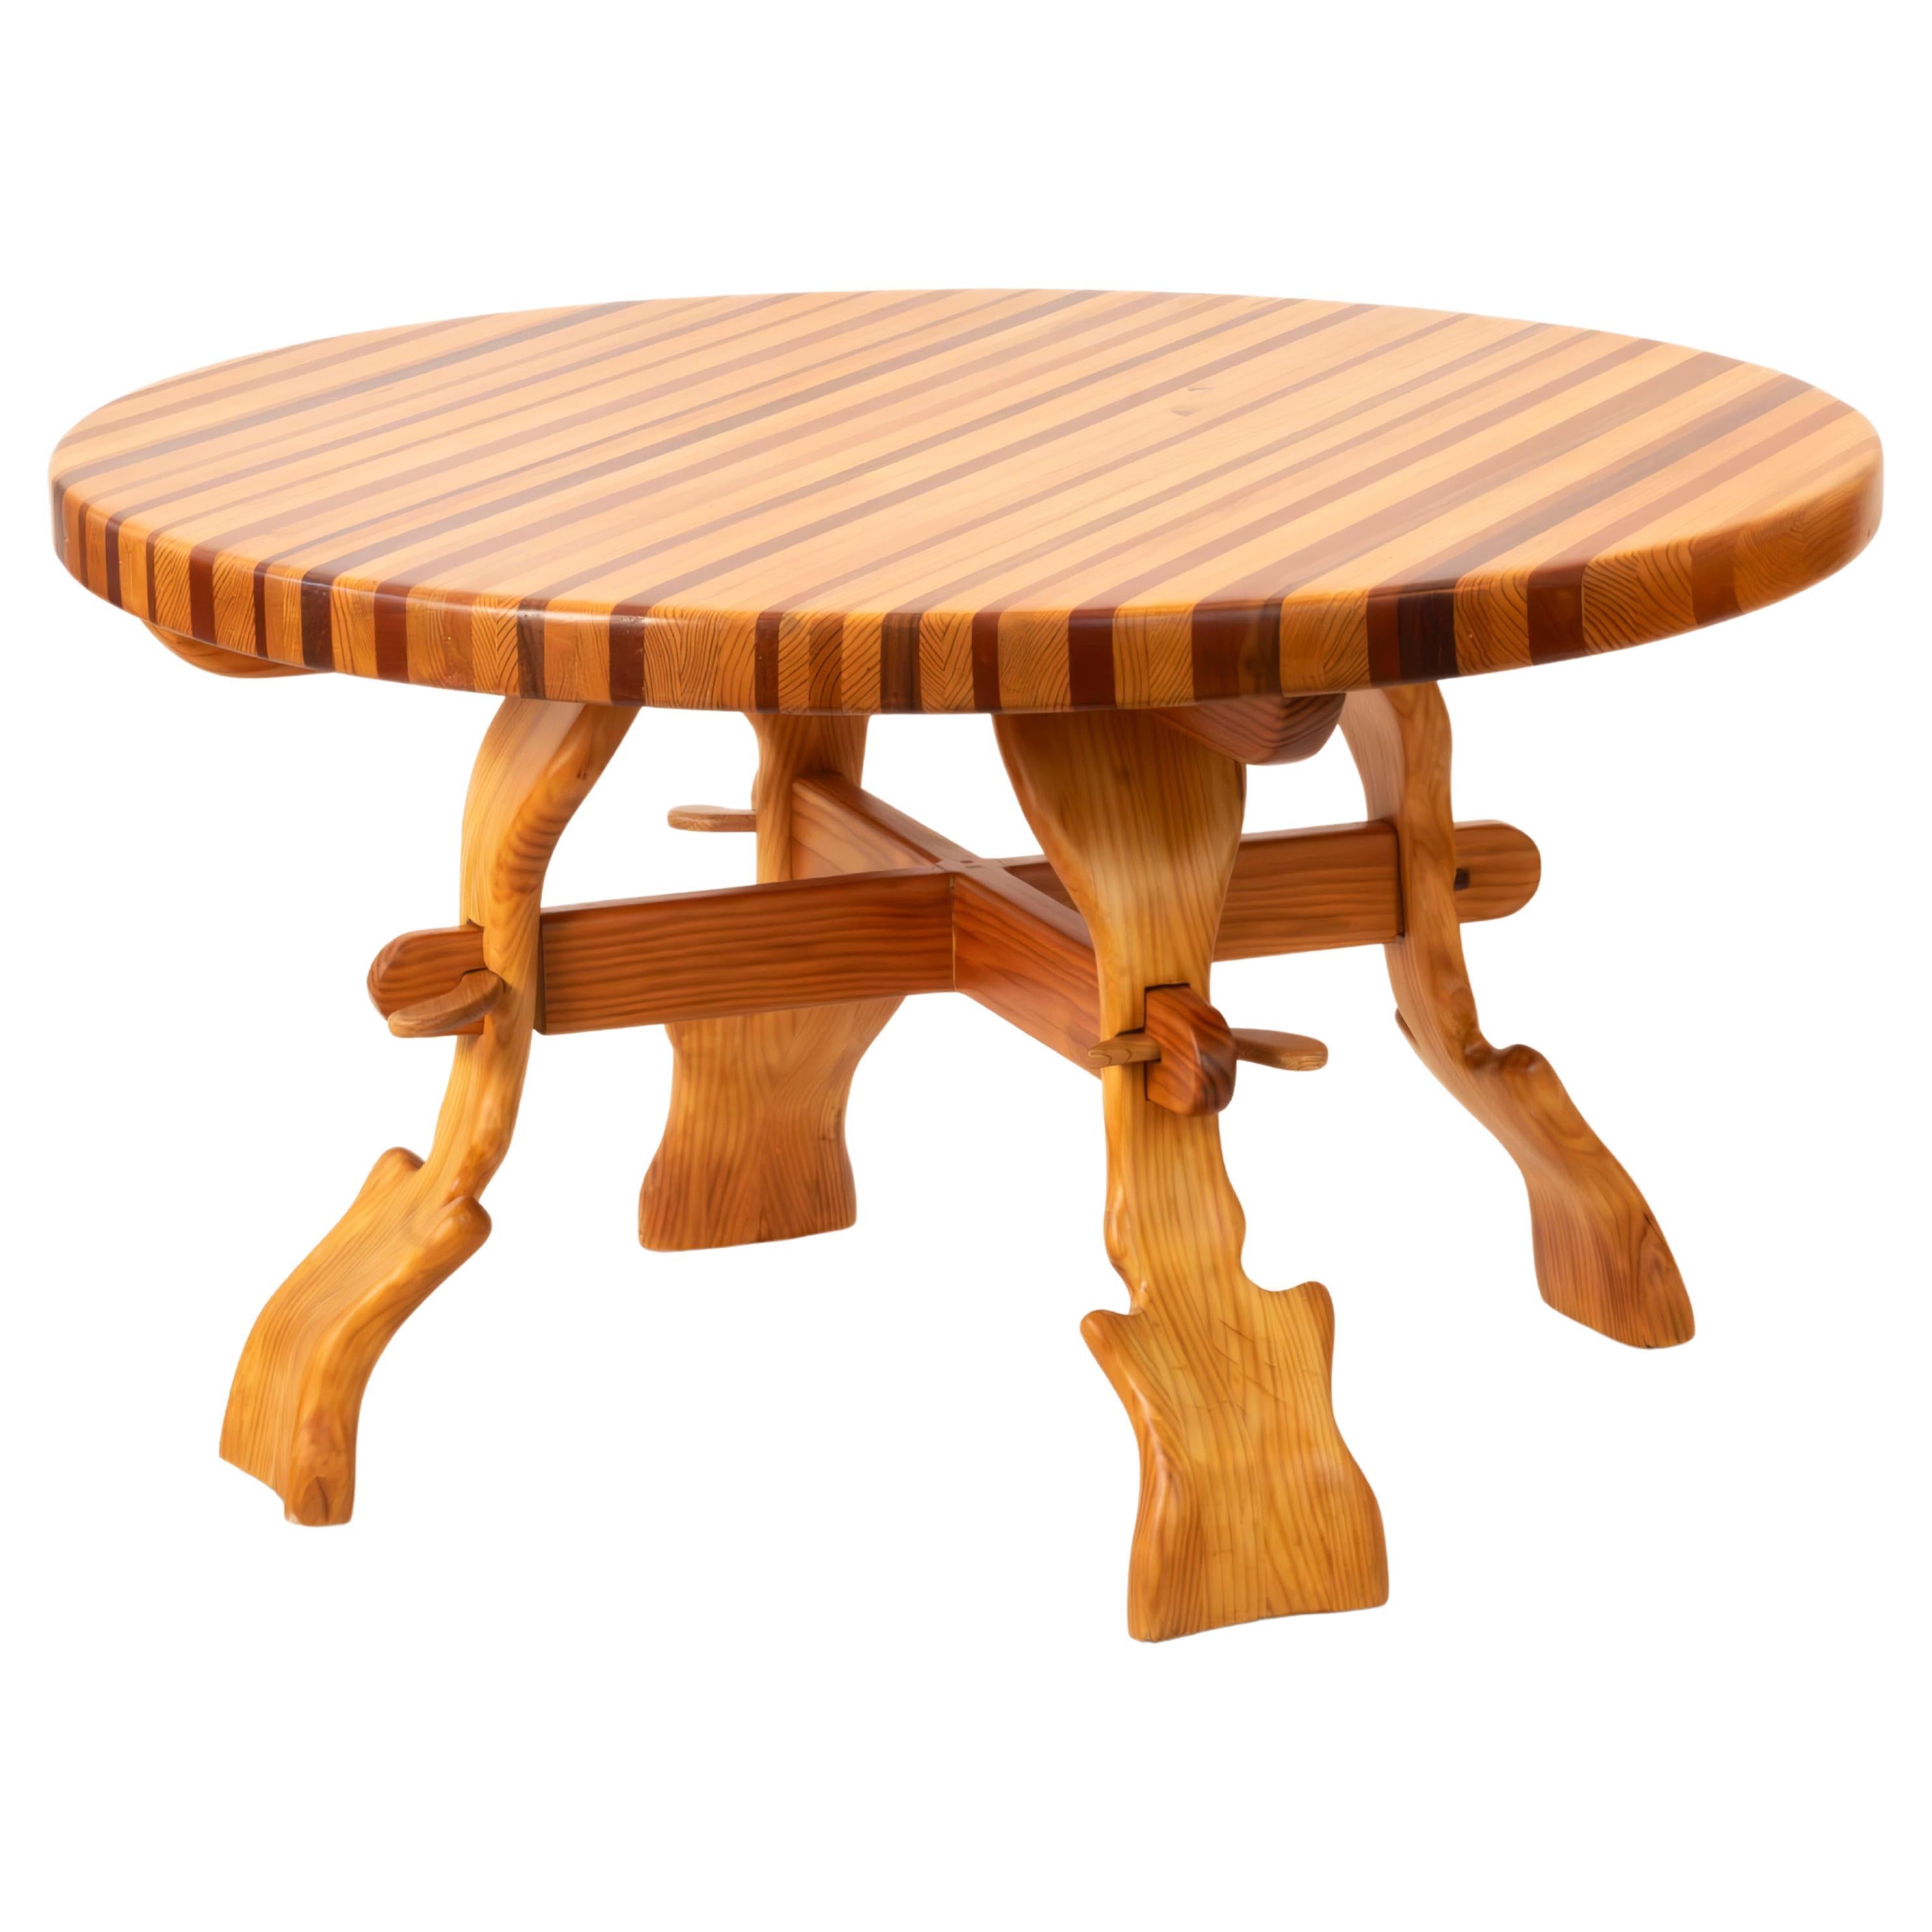 Fantastic Vintage Mexican Solid Wood Dining Set; Organic shaped woodworking For Sale